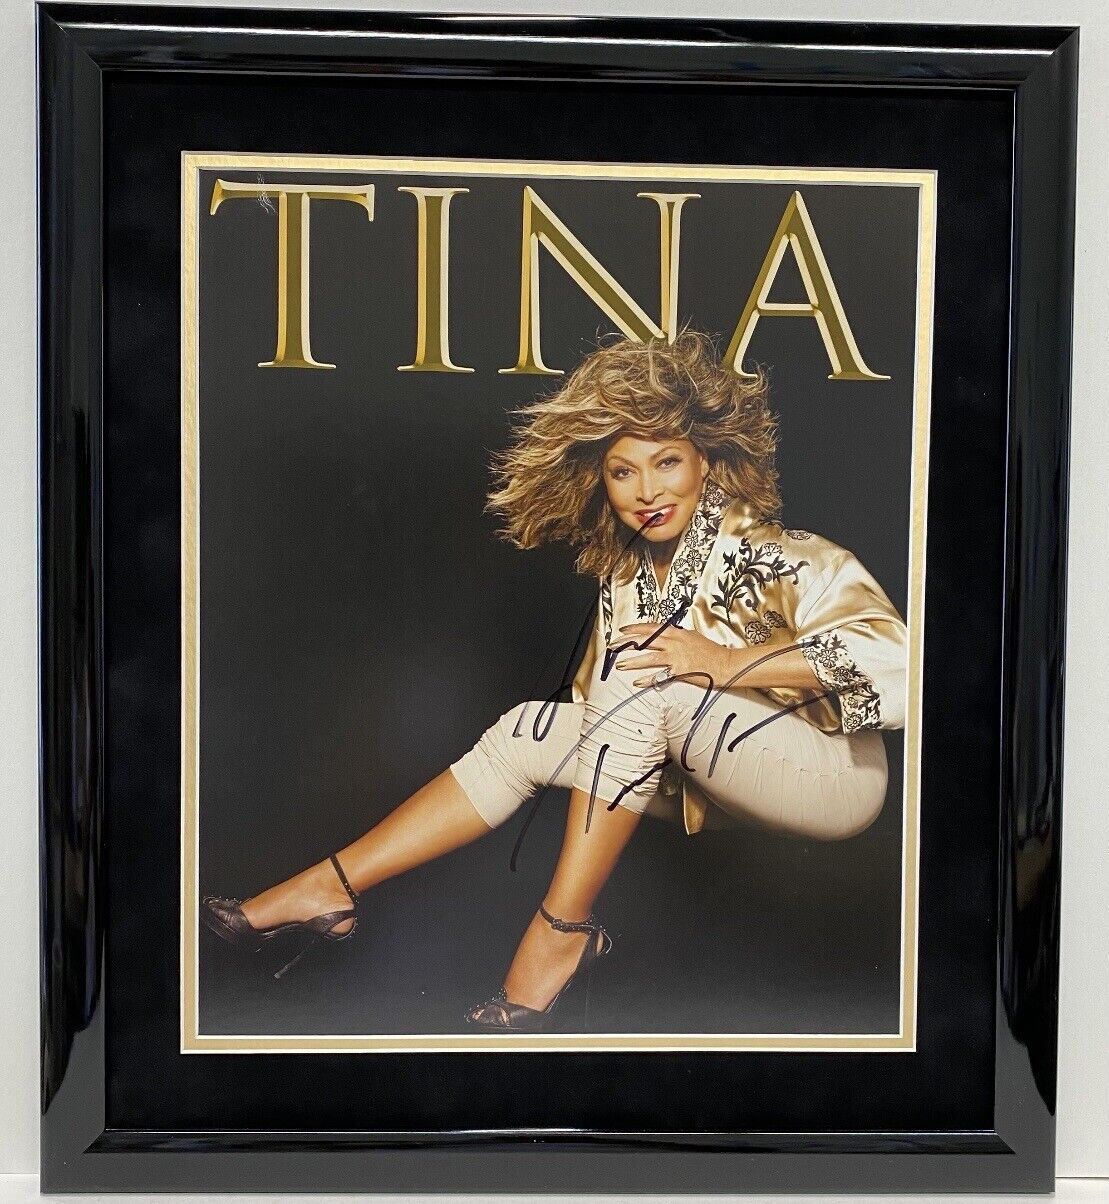 Tina Turner SIGNED Autographed Framed Photo Poster painting 15X18 Sexy Rock And Roll